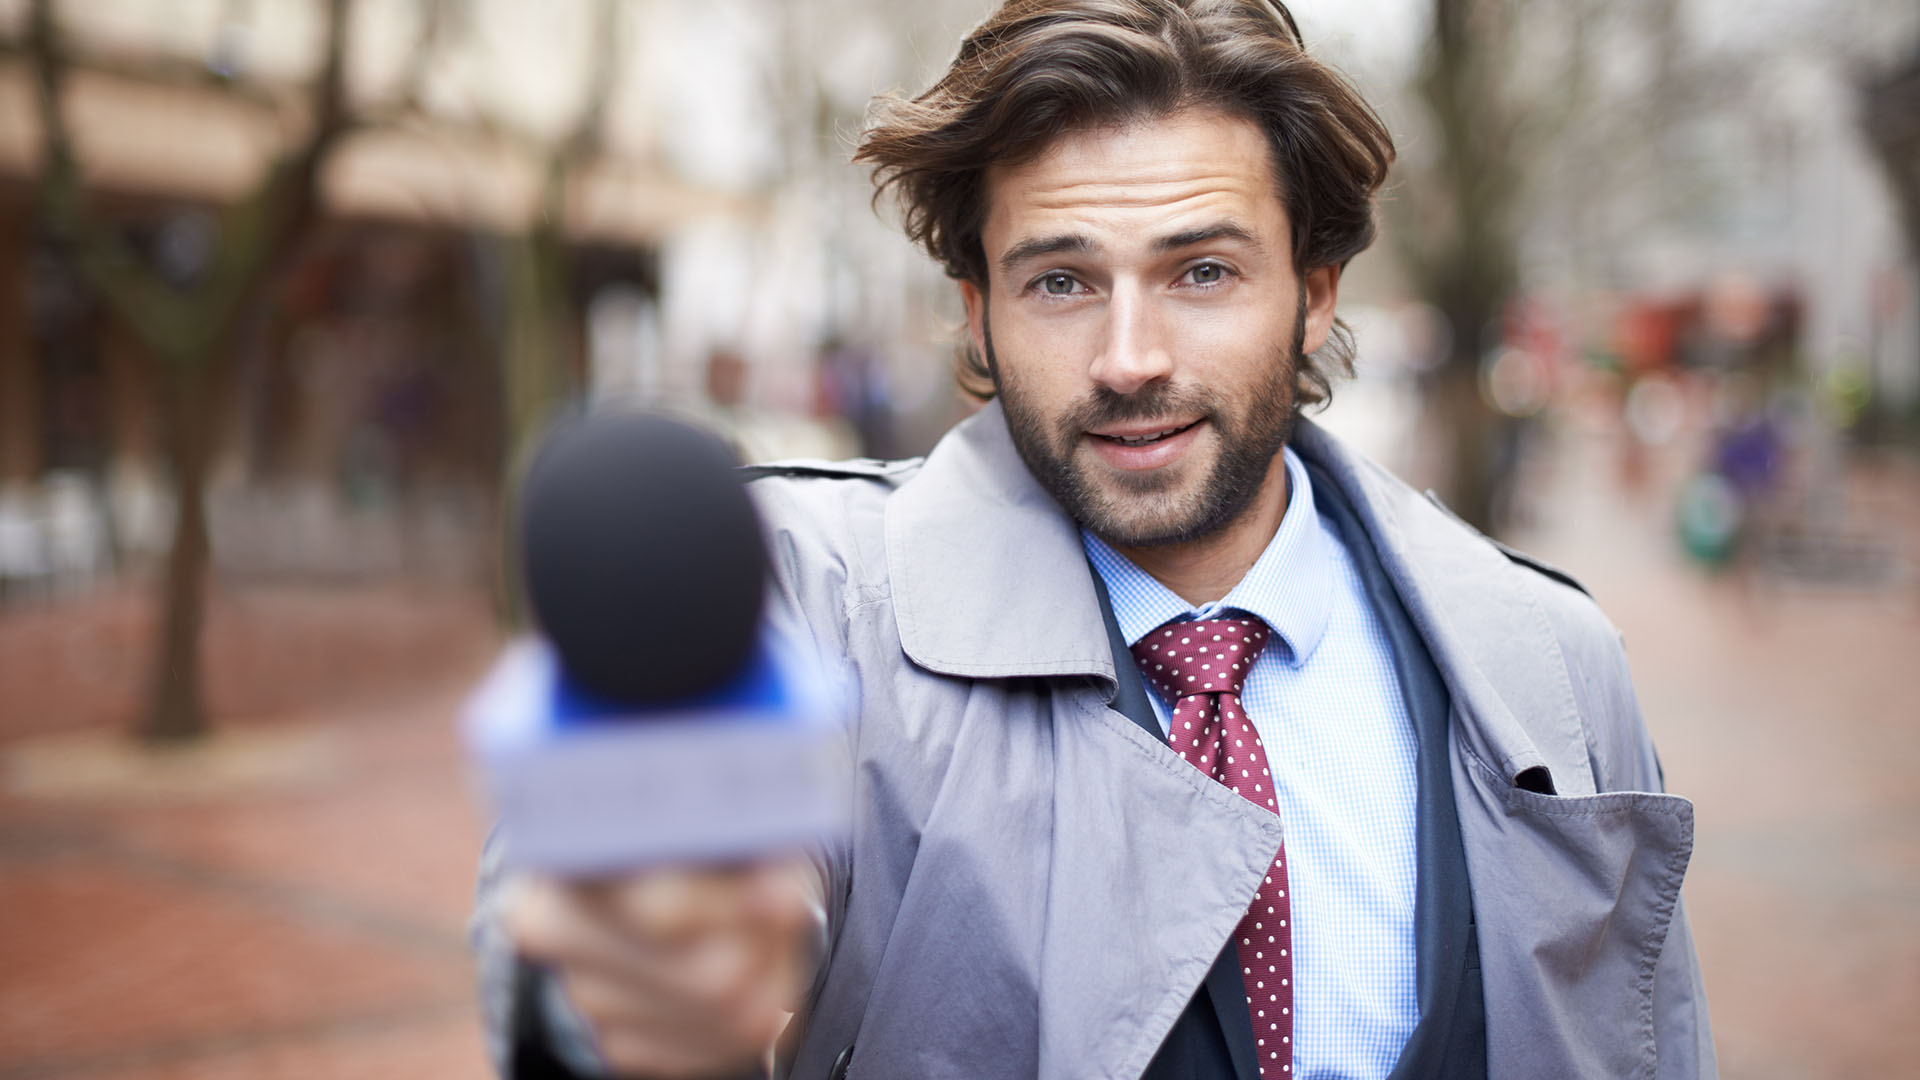 A man with long brown hair and a beard holds a microphone towards the camera. He is wearing a gray trench coat, blue shirt, and red tie, standing outdoors on a brick pavement street, ready for the Battle for the Newsroom.